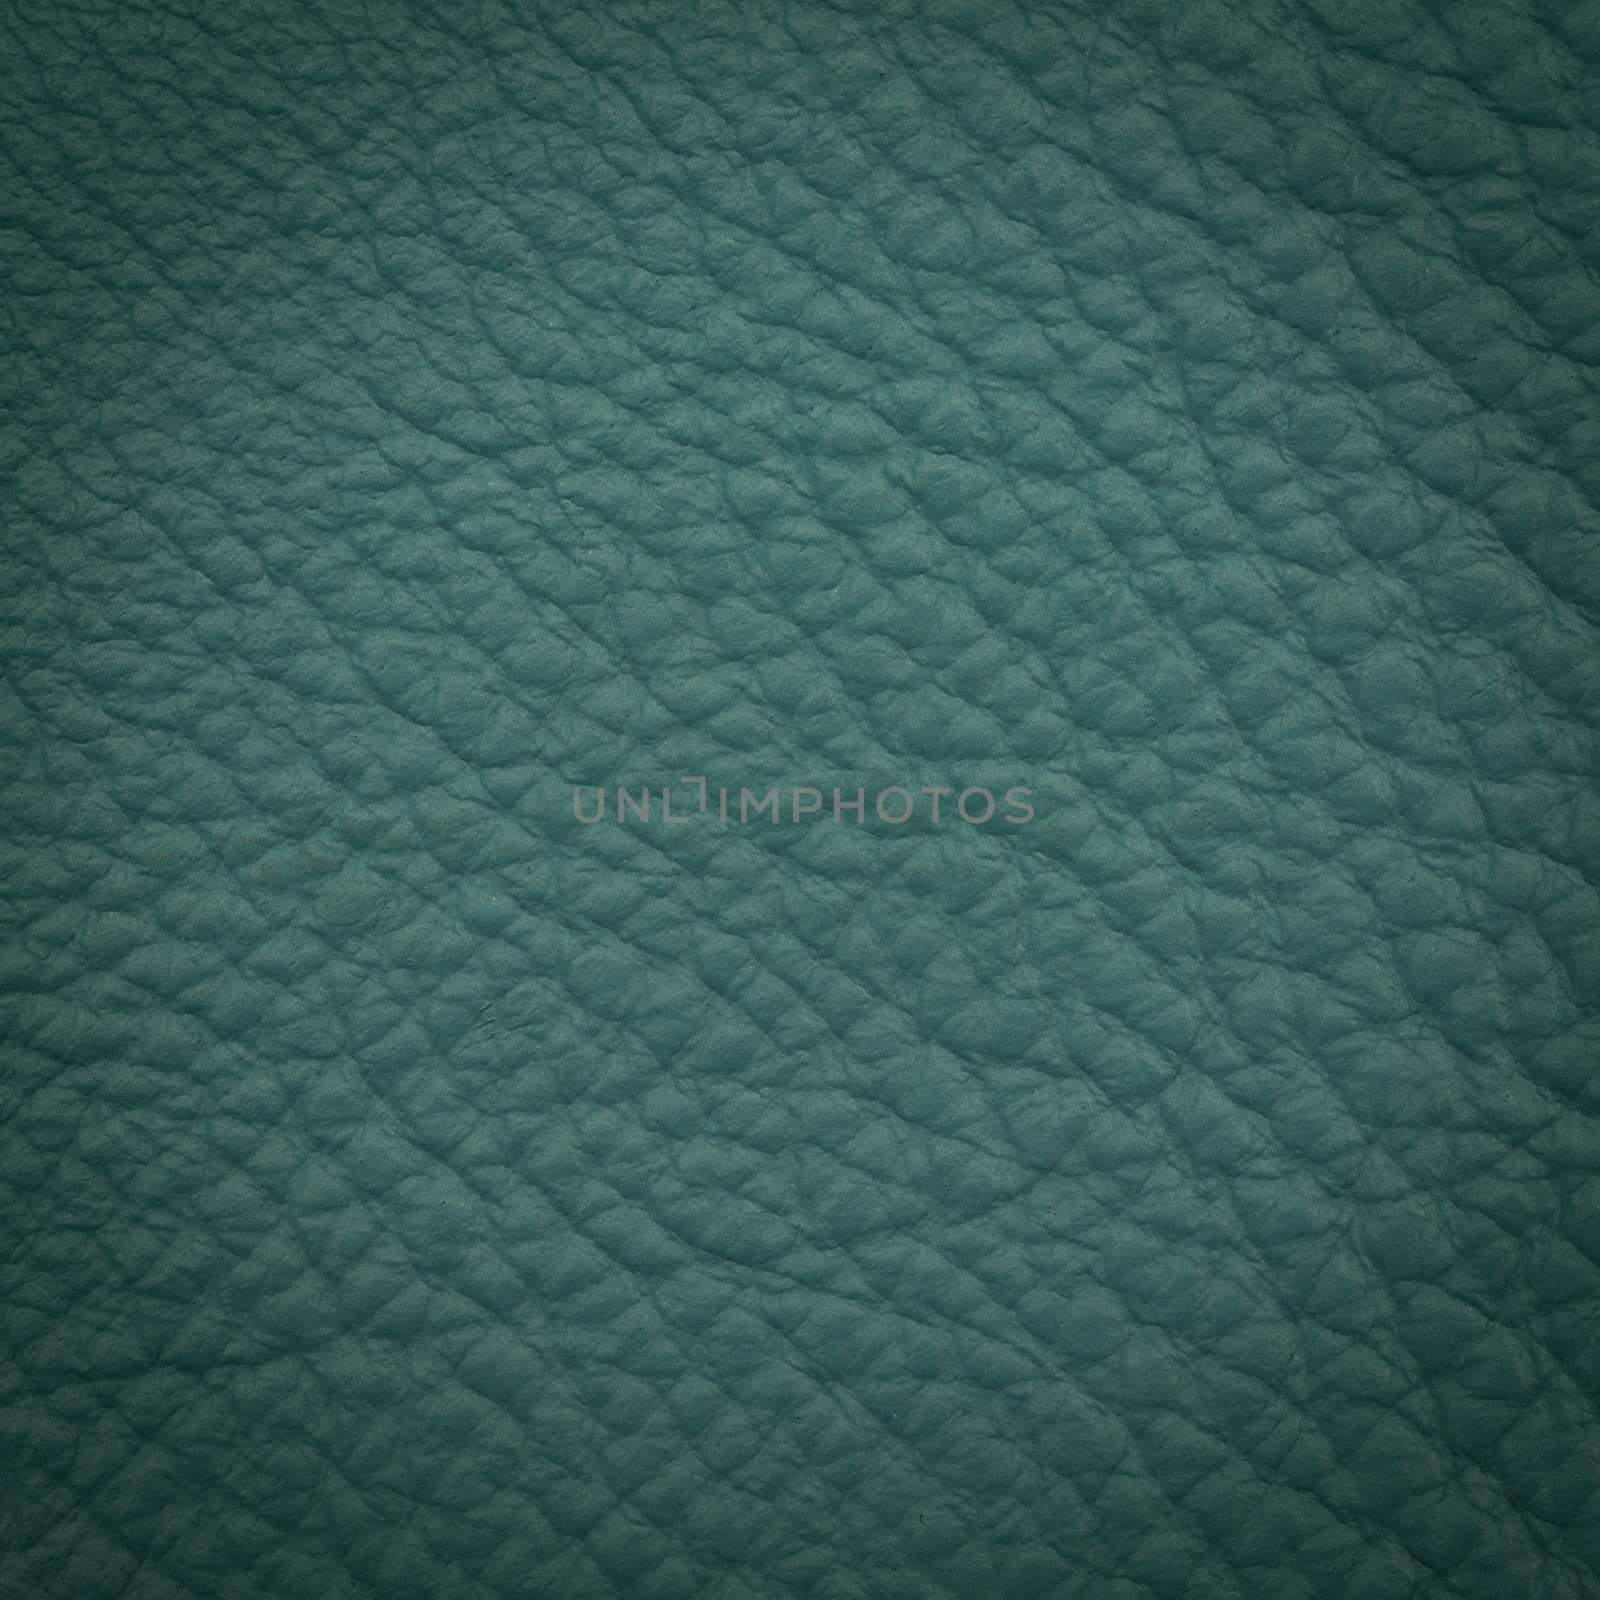 Green leather macro shot texture for background